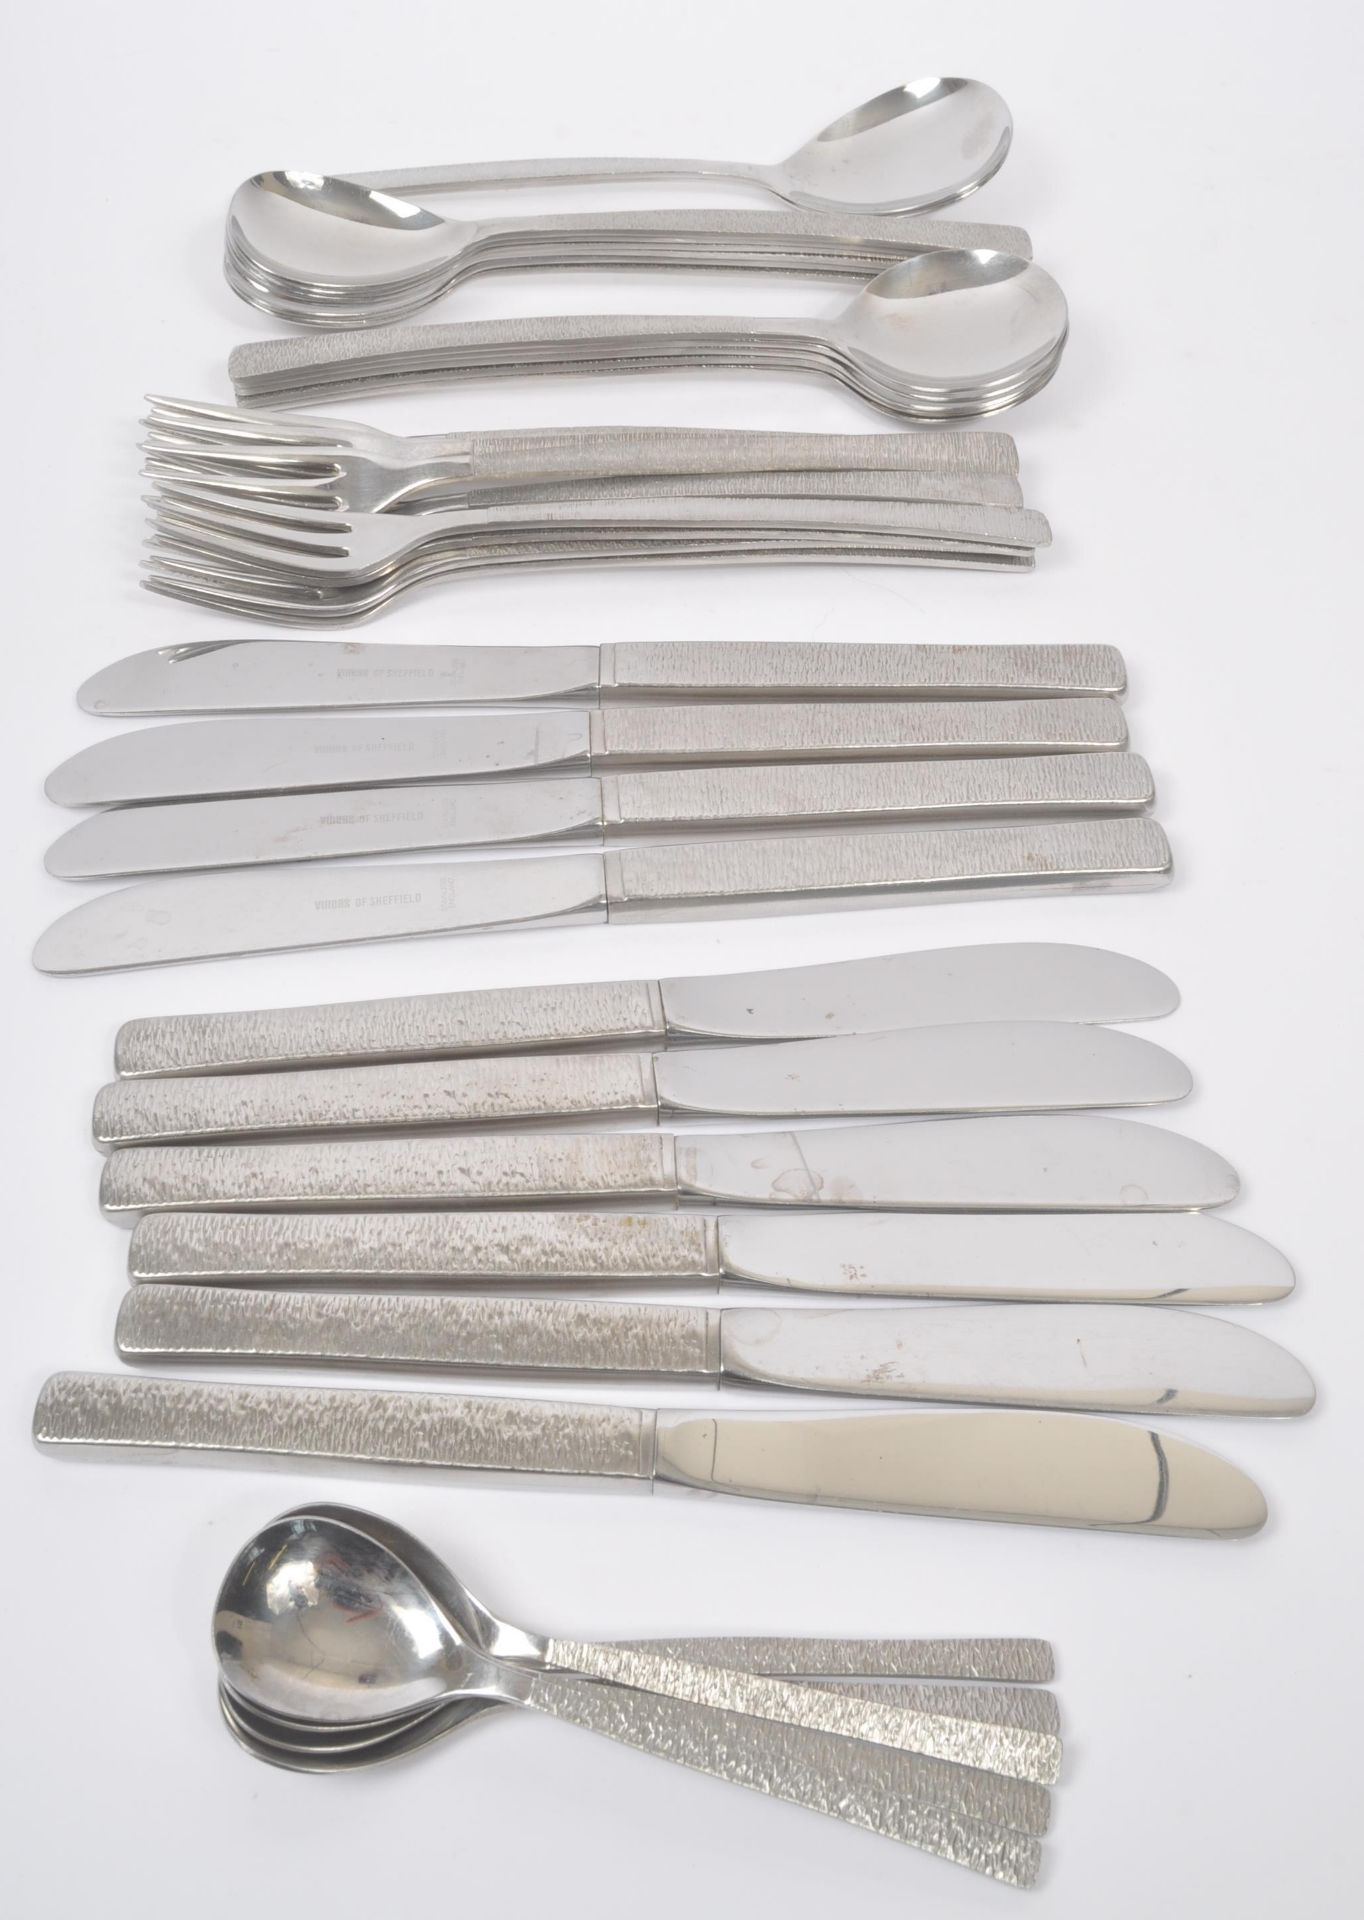 COLLECTION OF VINERS OF SHEFFIELD BARK EFFECT CUTLERY - Image 5 of 6